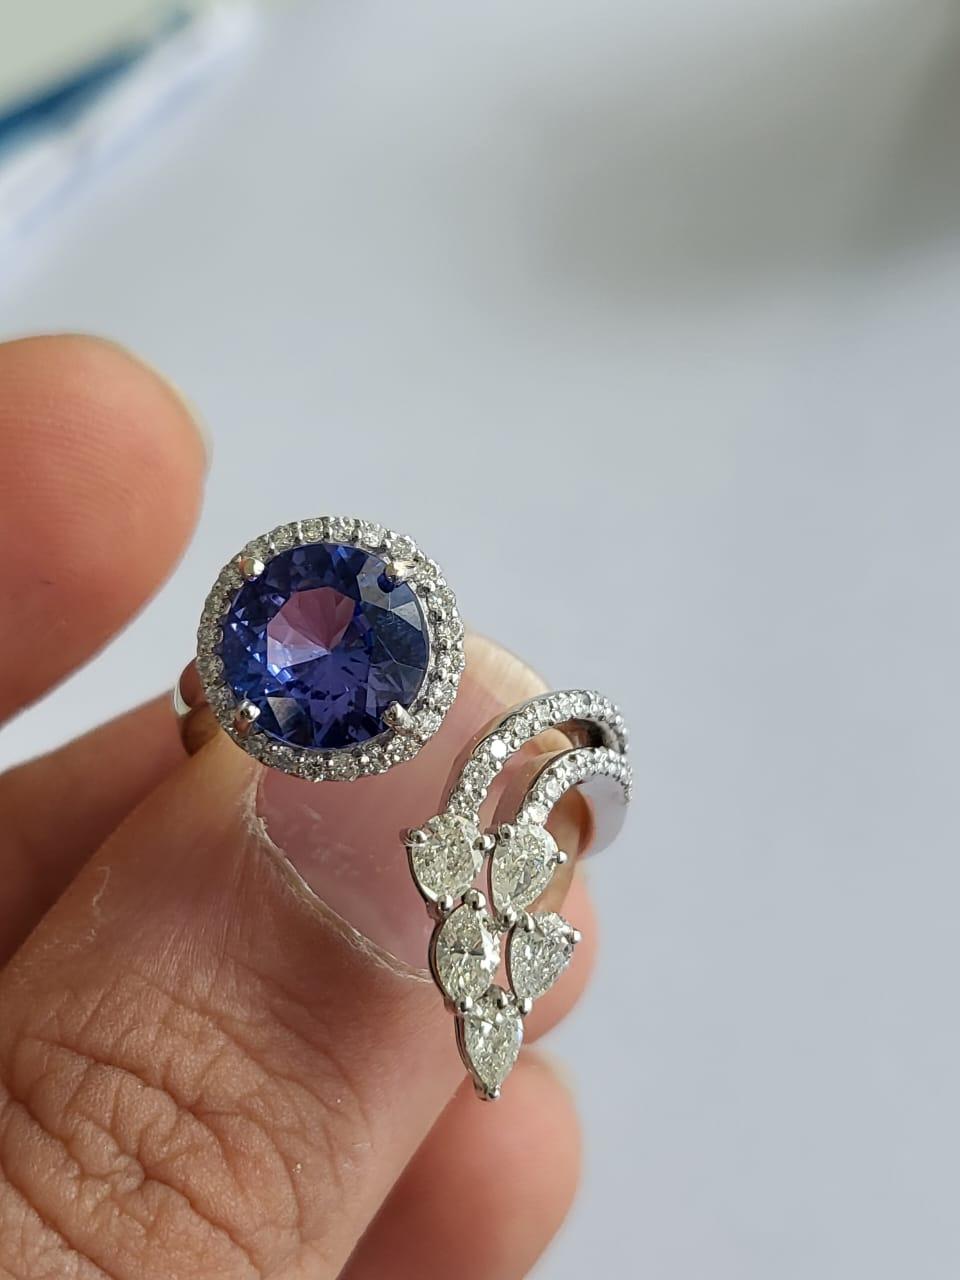 A very beautiful and modern, Tanzanite Engagement Cocktail Ring set in 18K White Gold & Diamonds. The weight of the Tanzanite is 2.63 carats. The Tanzanite is responsibly sourced from Tanzania. The combined weight of the Diamonds is 0.92 carats. Net